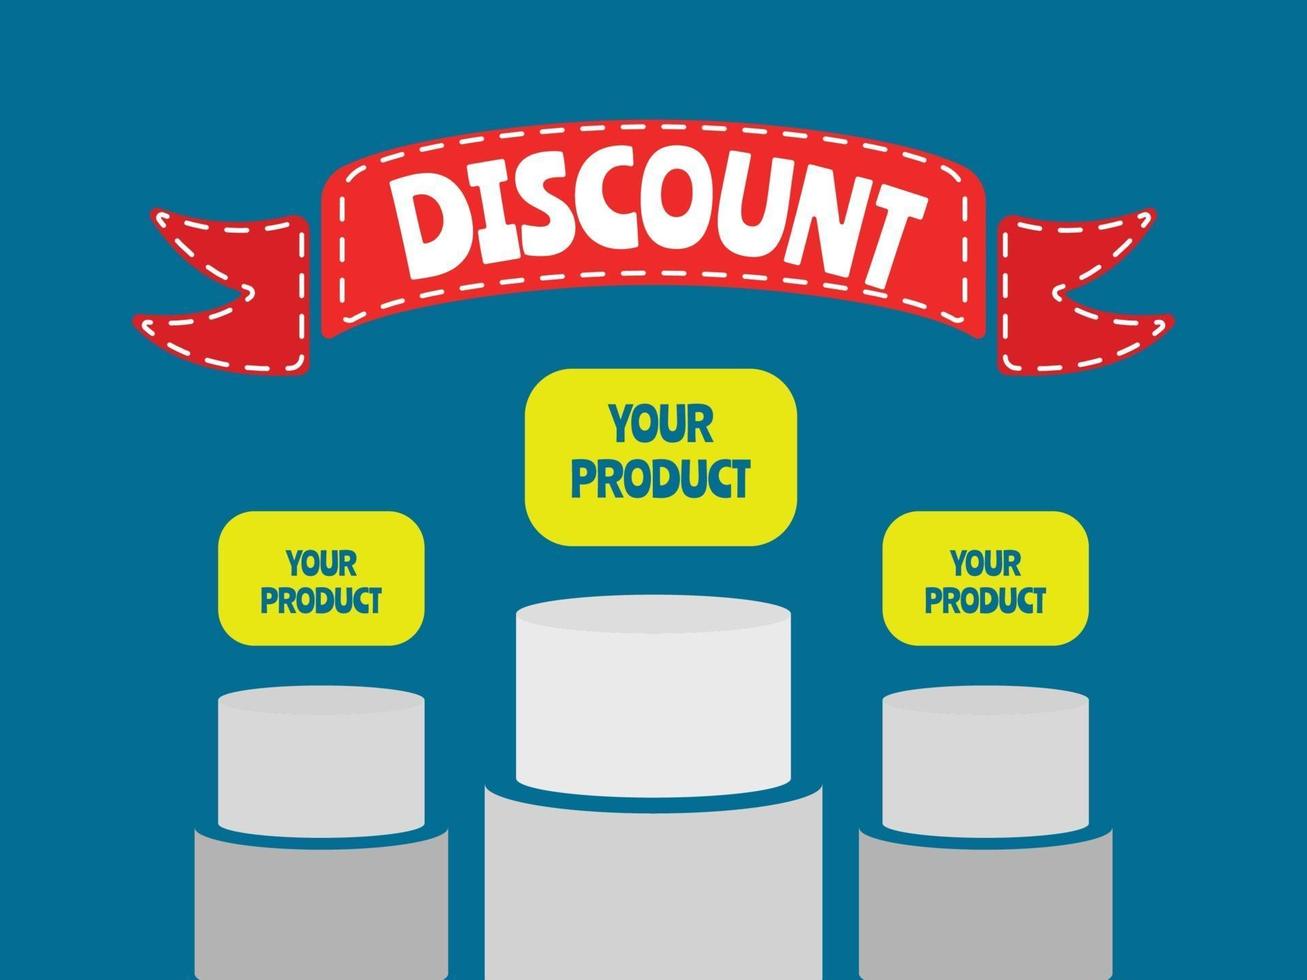 Discount Product, set of labels for sale, discount, announcement, advertise vector